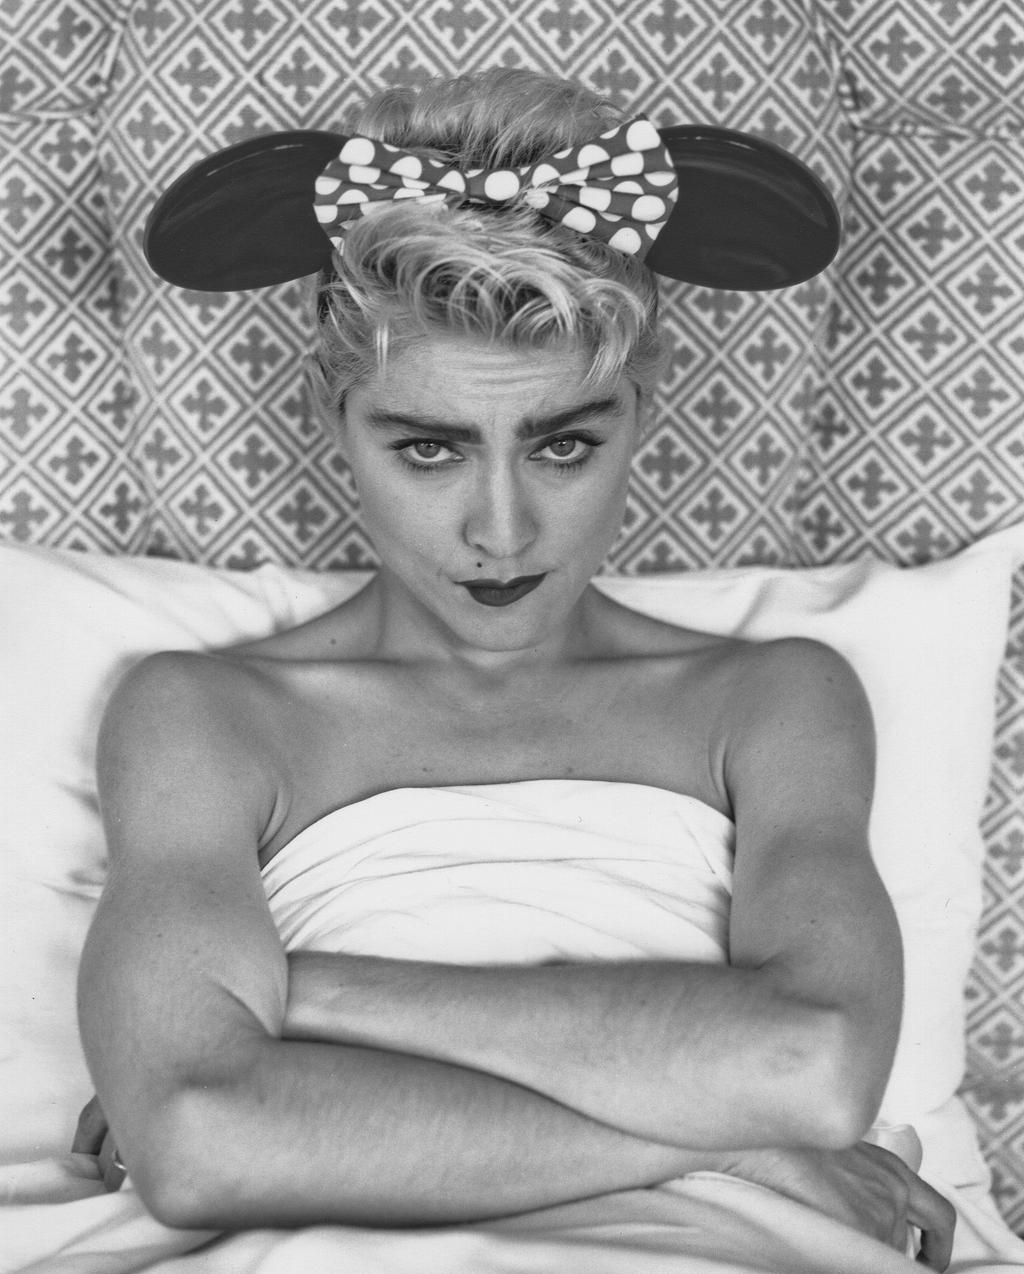 madonna_80s_mouse_by_confessiononmdna-d8